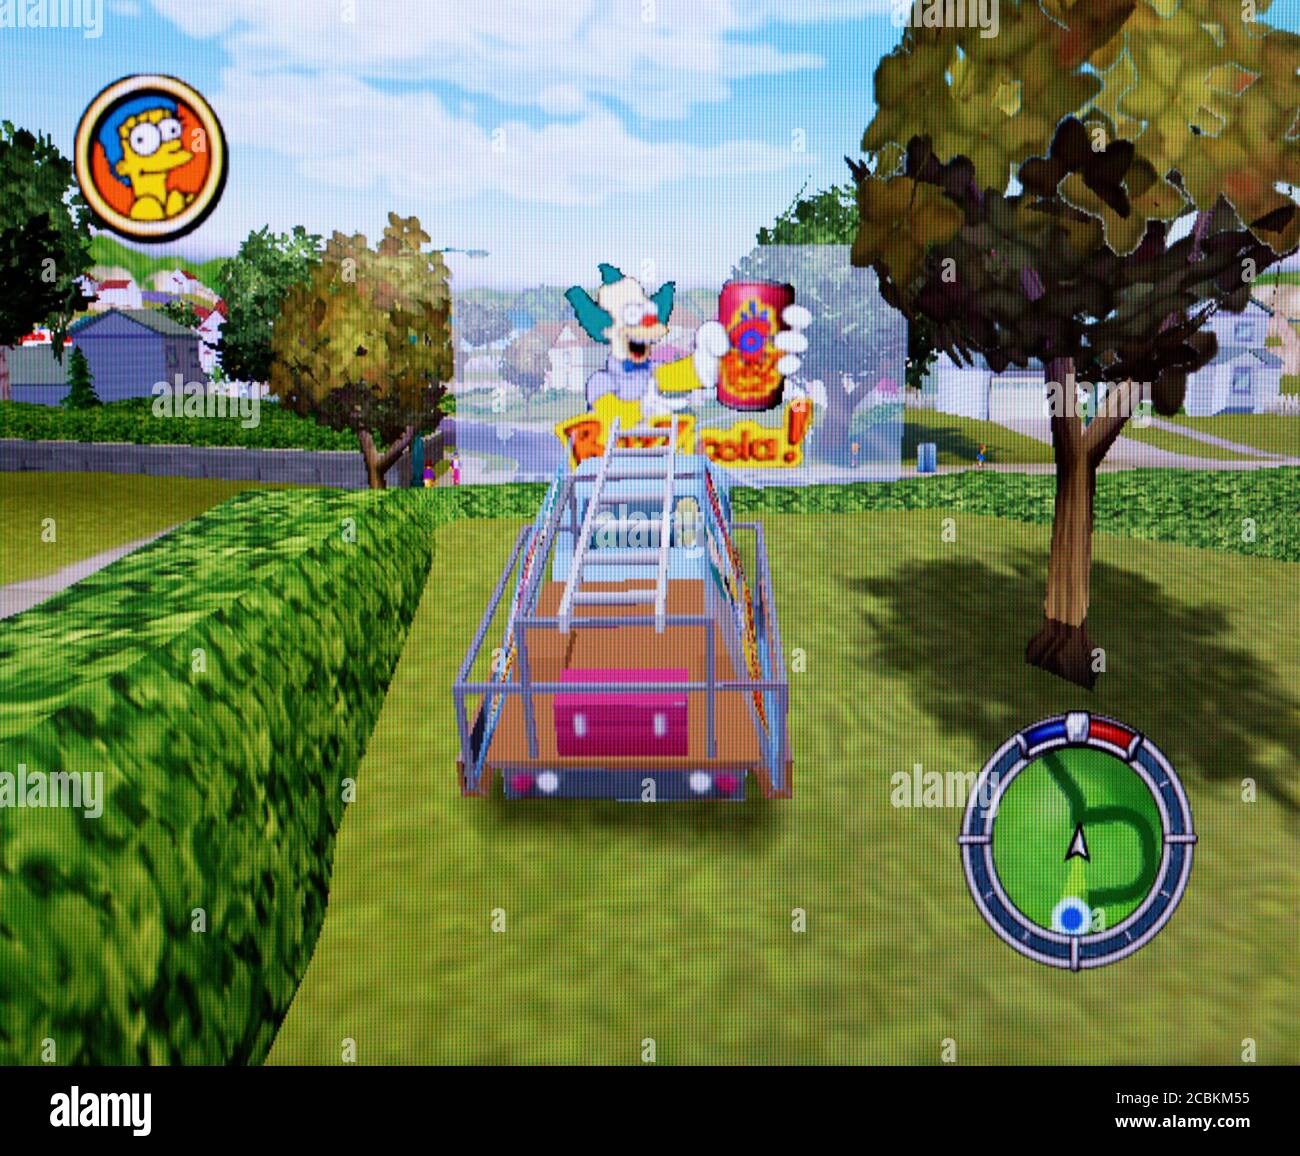 studio klep Lucht The Simpsons Hit & Run - Nintendo Gamecube Videogame - Editorial use only  Stock Photo - Alamy